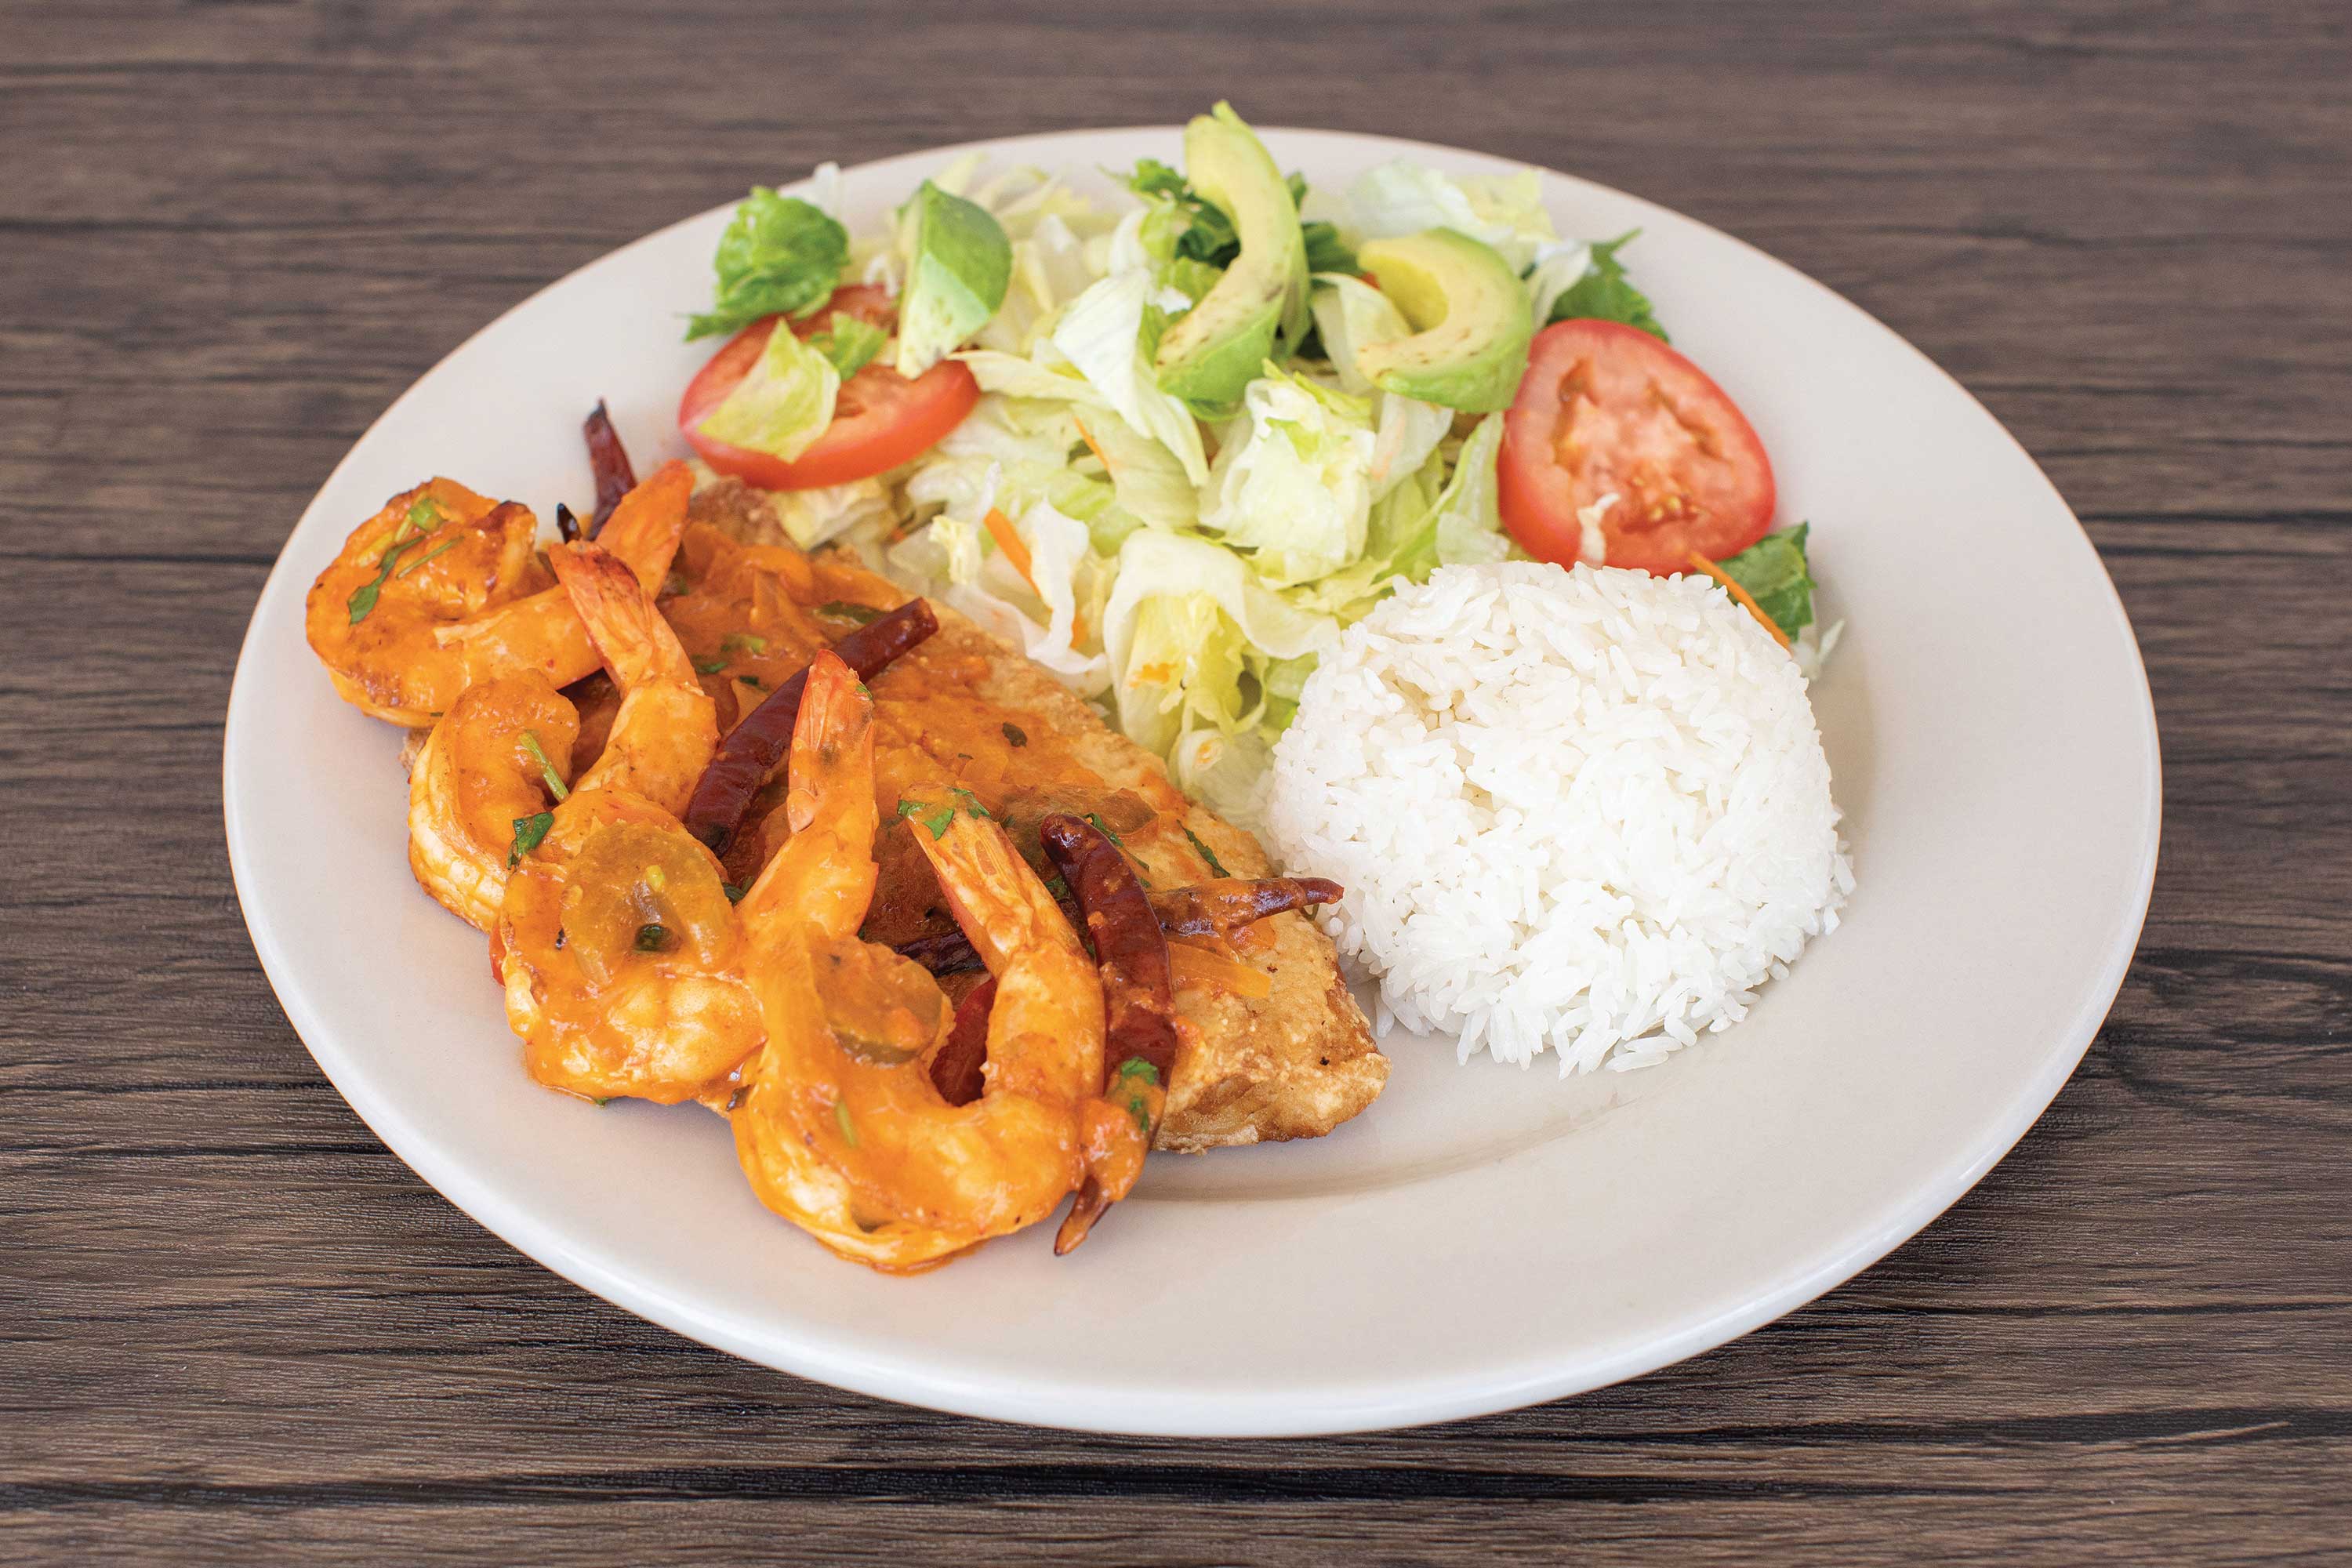 Image: Tilapa fish fillet topped with grilled shrimp alongside a lettuce and tomato salad with a mound of white rice.